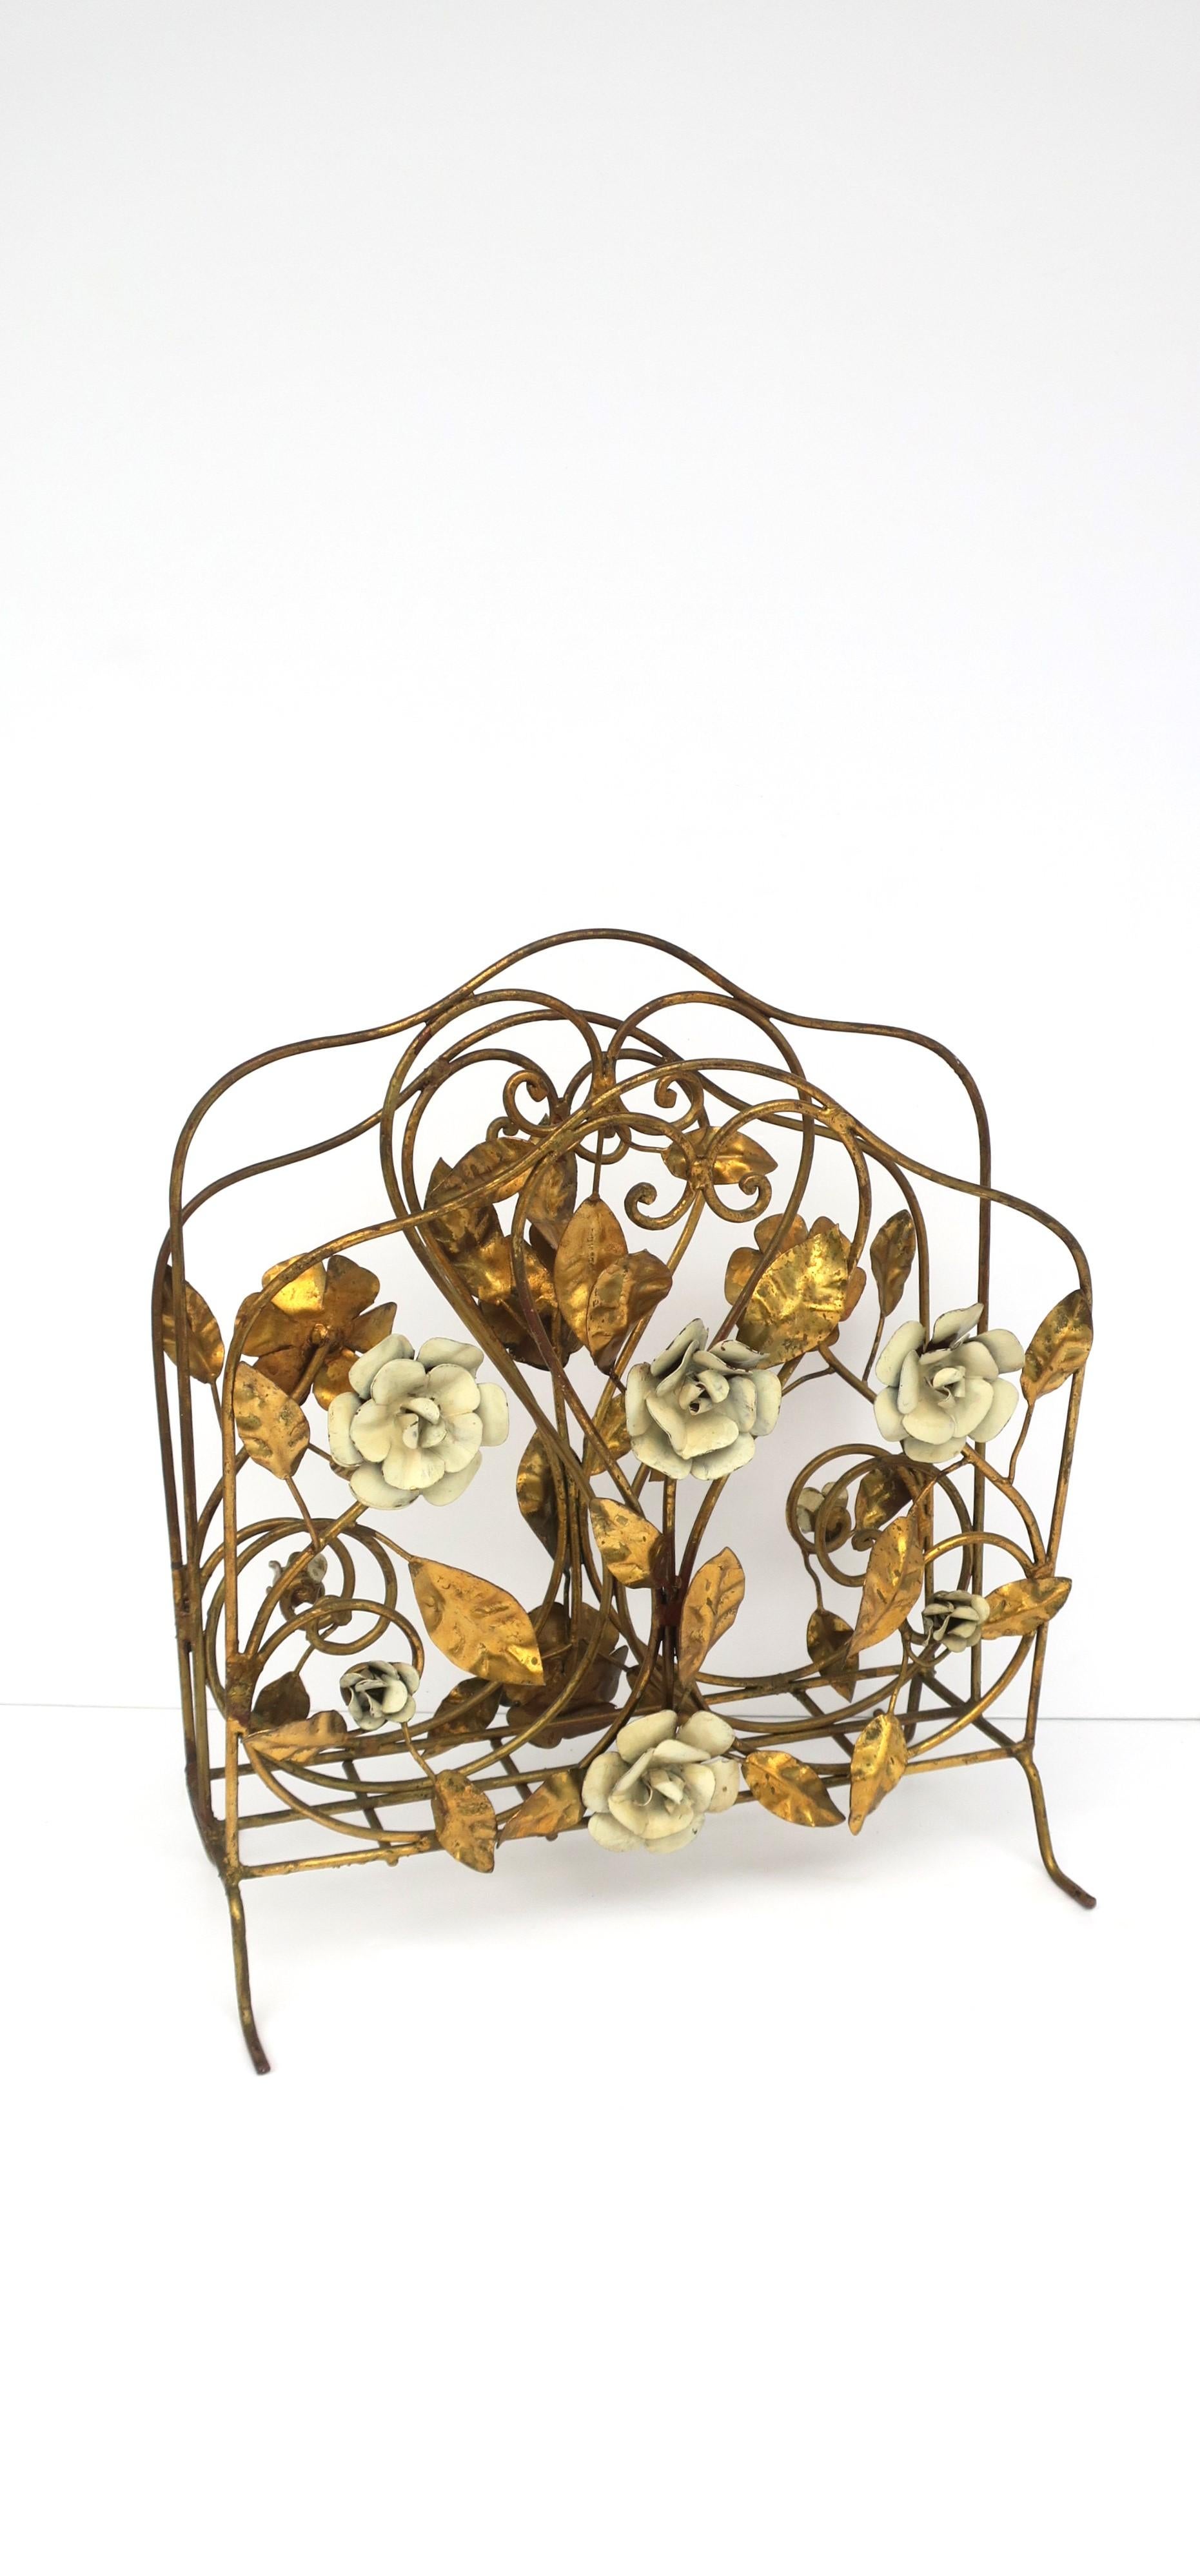 Italian Gold Gilt Magazine Holder Rack with Flowers and Leaves, 1950s For Sale 2